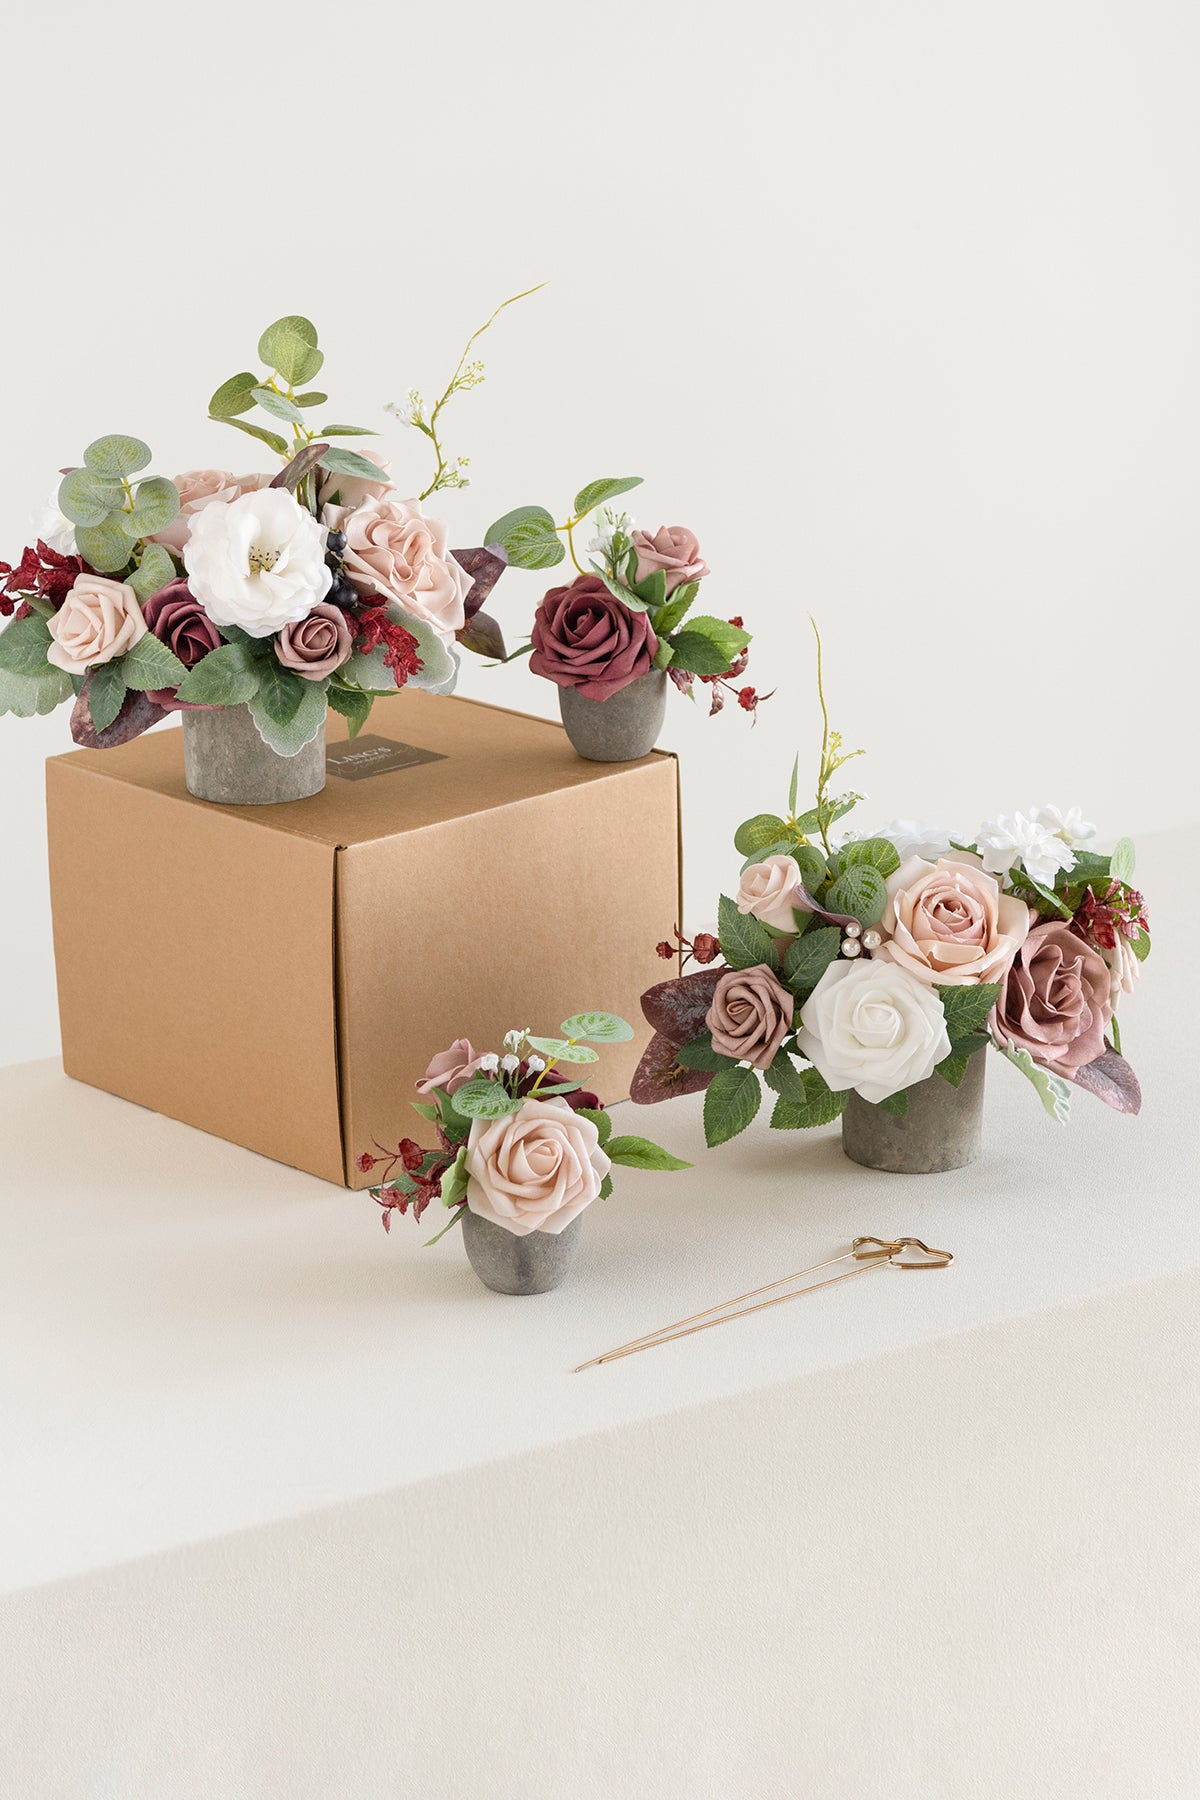 Assorted Floral Centerpiece Set in Dusty Rose & Mauve